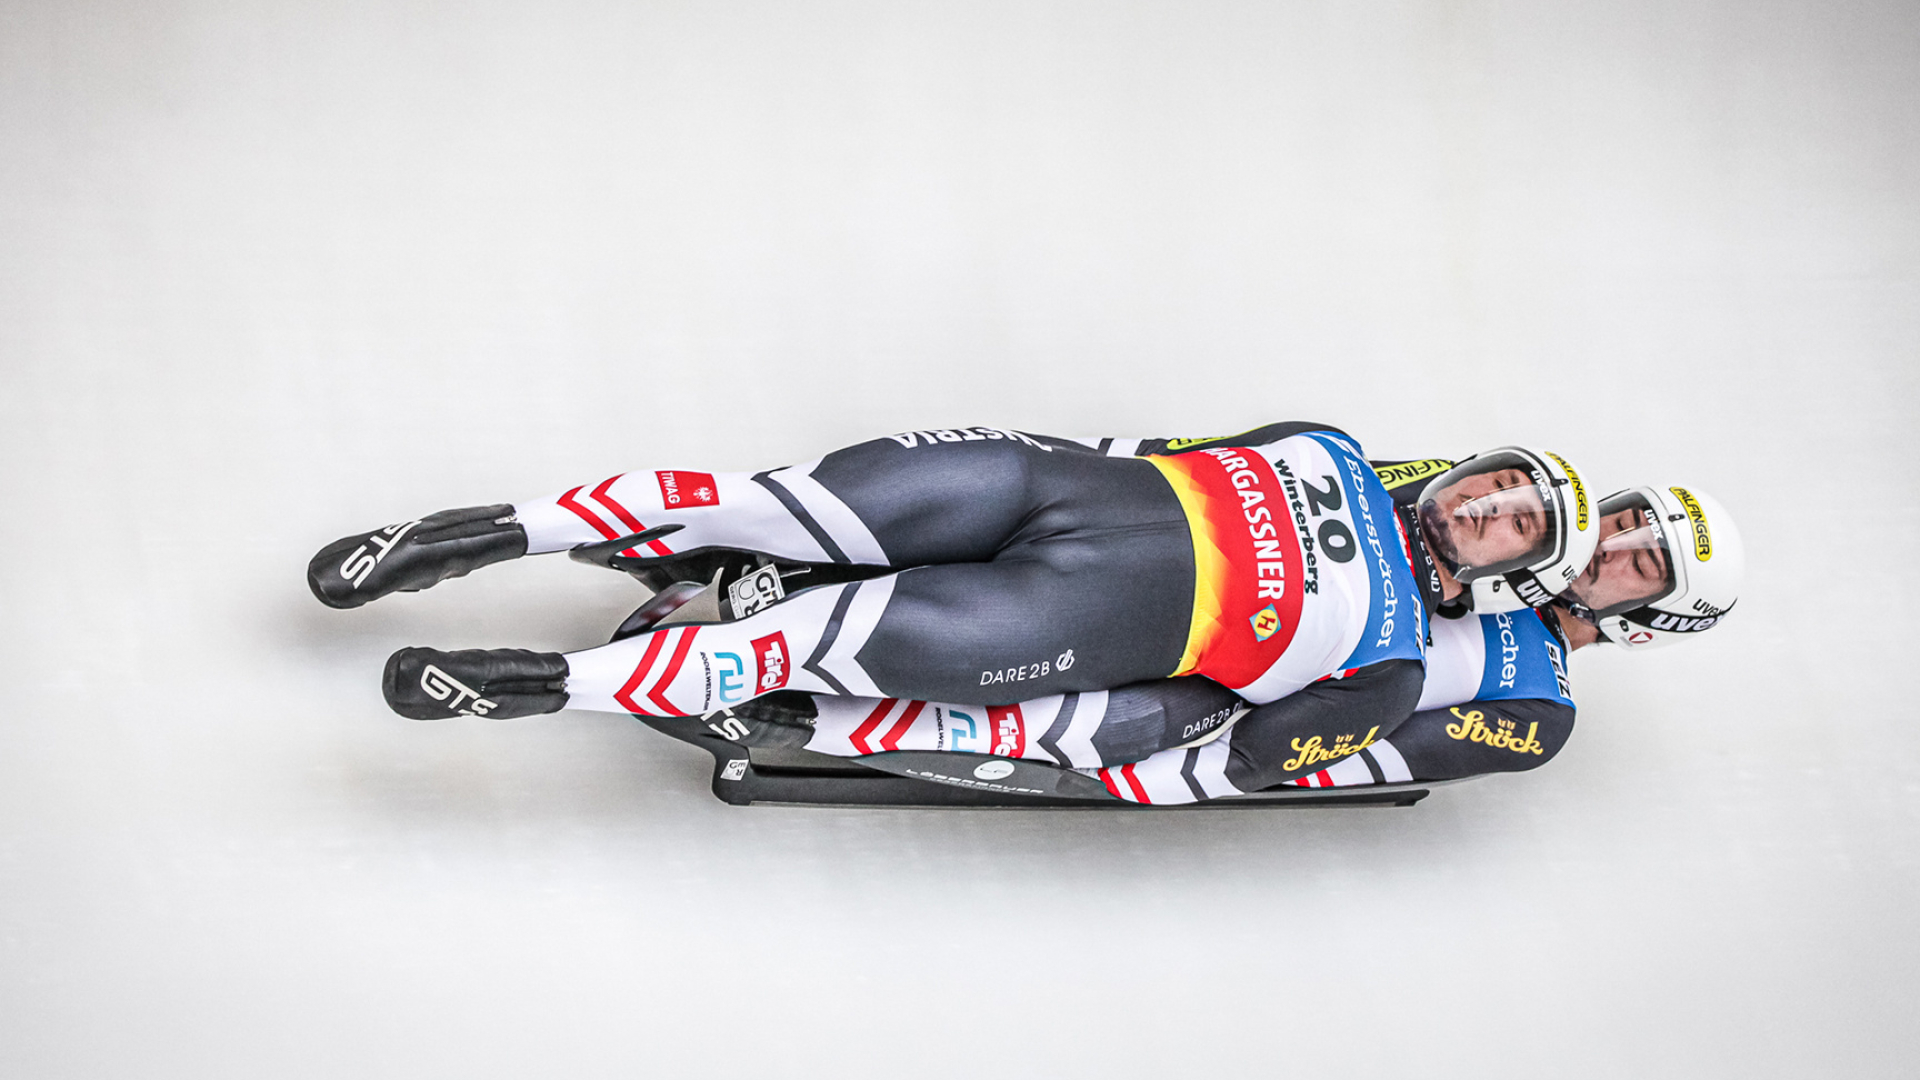 Luge: Thomas Steu and Lorenz Koller of Austria, The 2021–22 Luge World Cup champions. 1920x1080 Full HD Wallpaper.